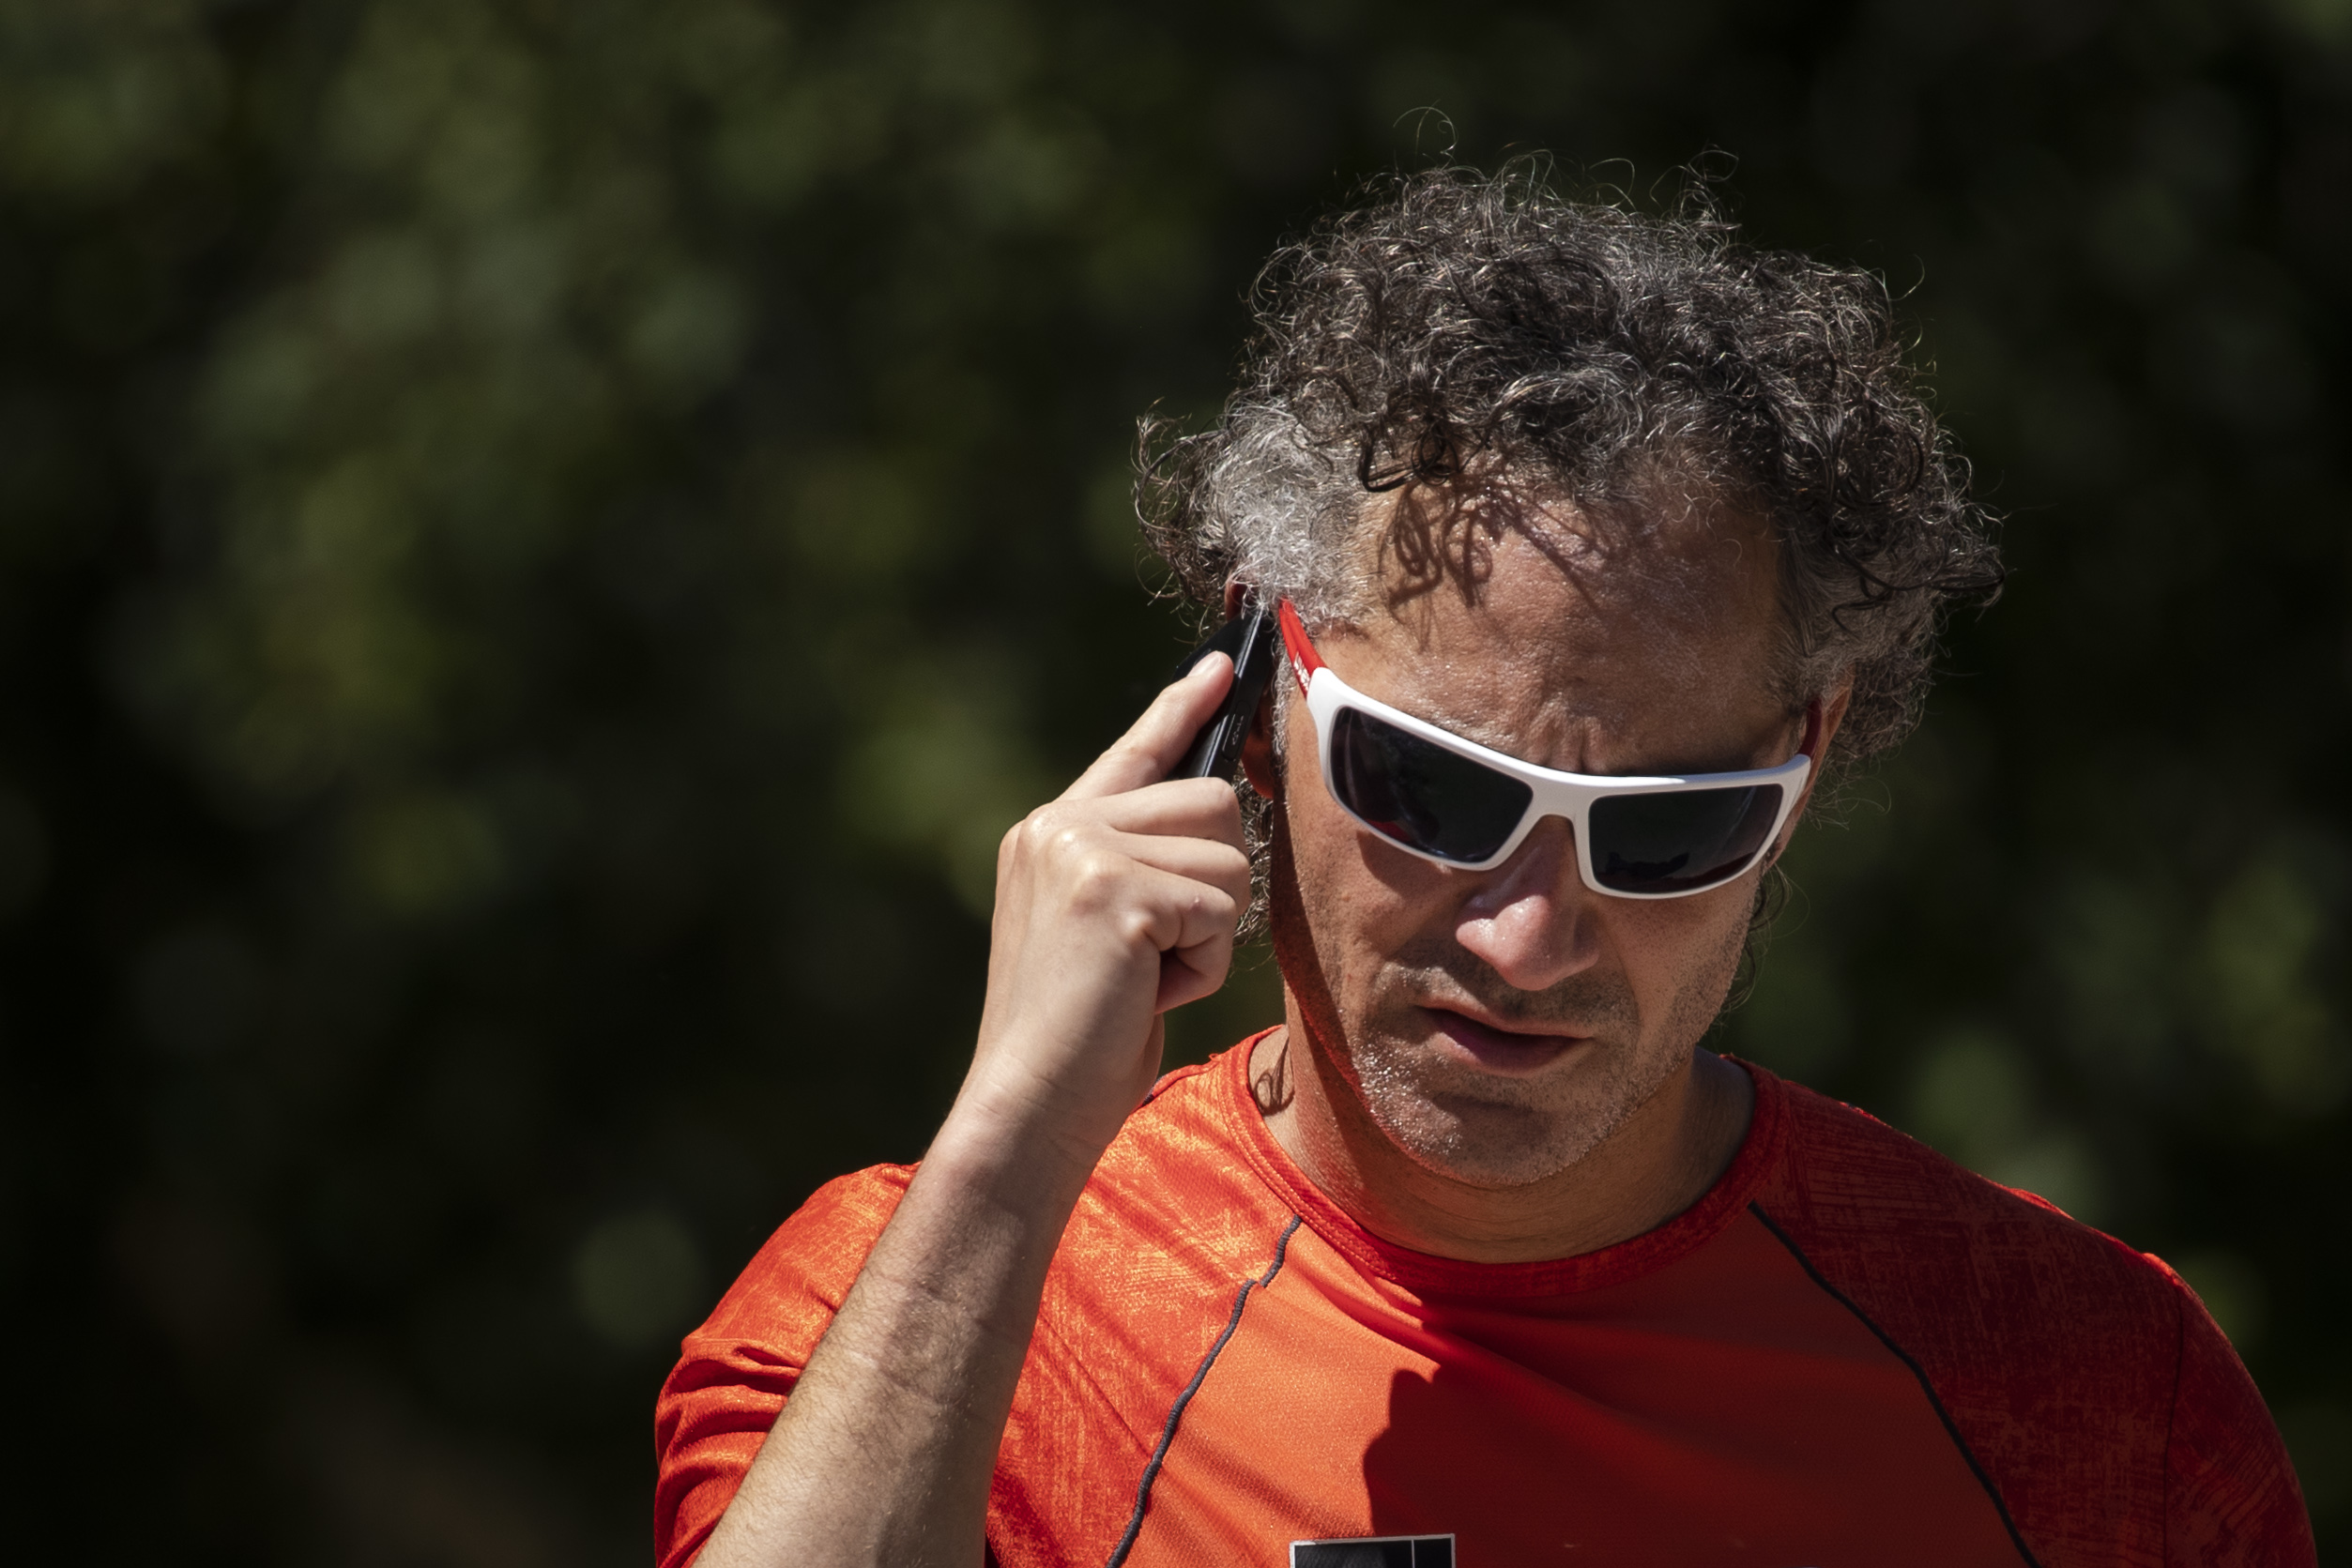 A candid shot of Palantir CEO Alex Karp wearing sunglasses and talking on his cell phone.